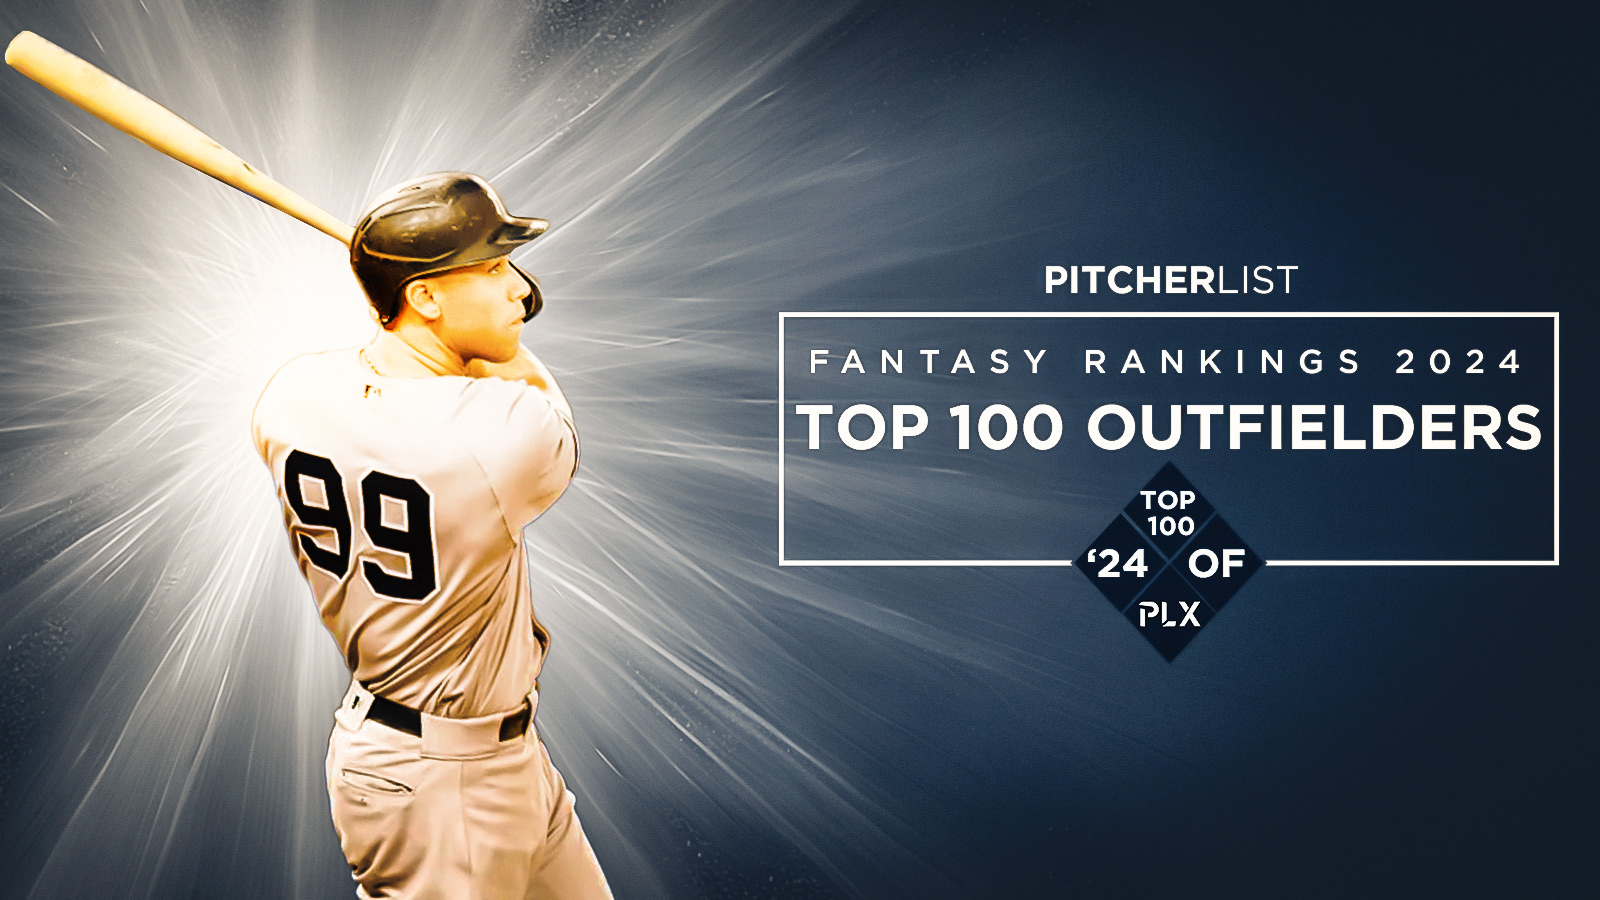 Top 100 Outfielders for Fantasy Baseball 2024 Pitcher List